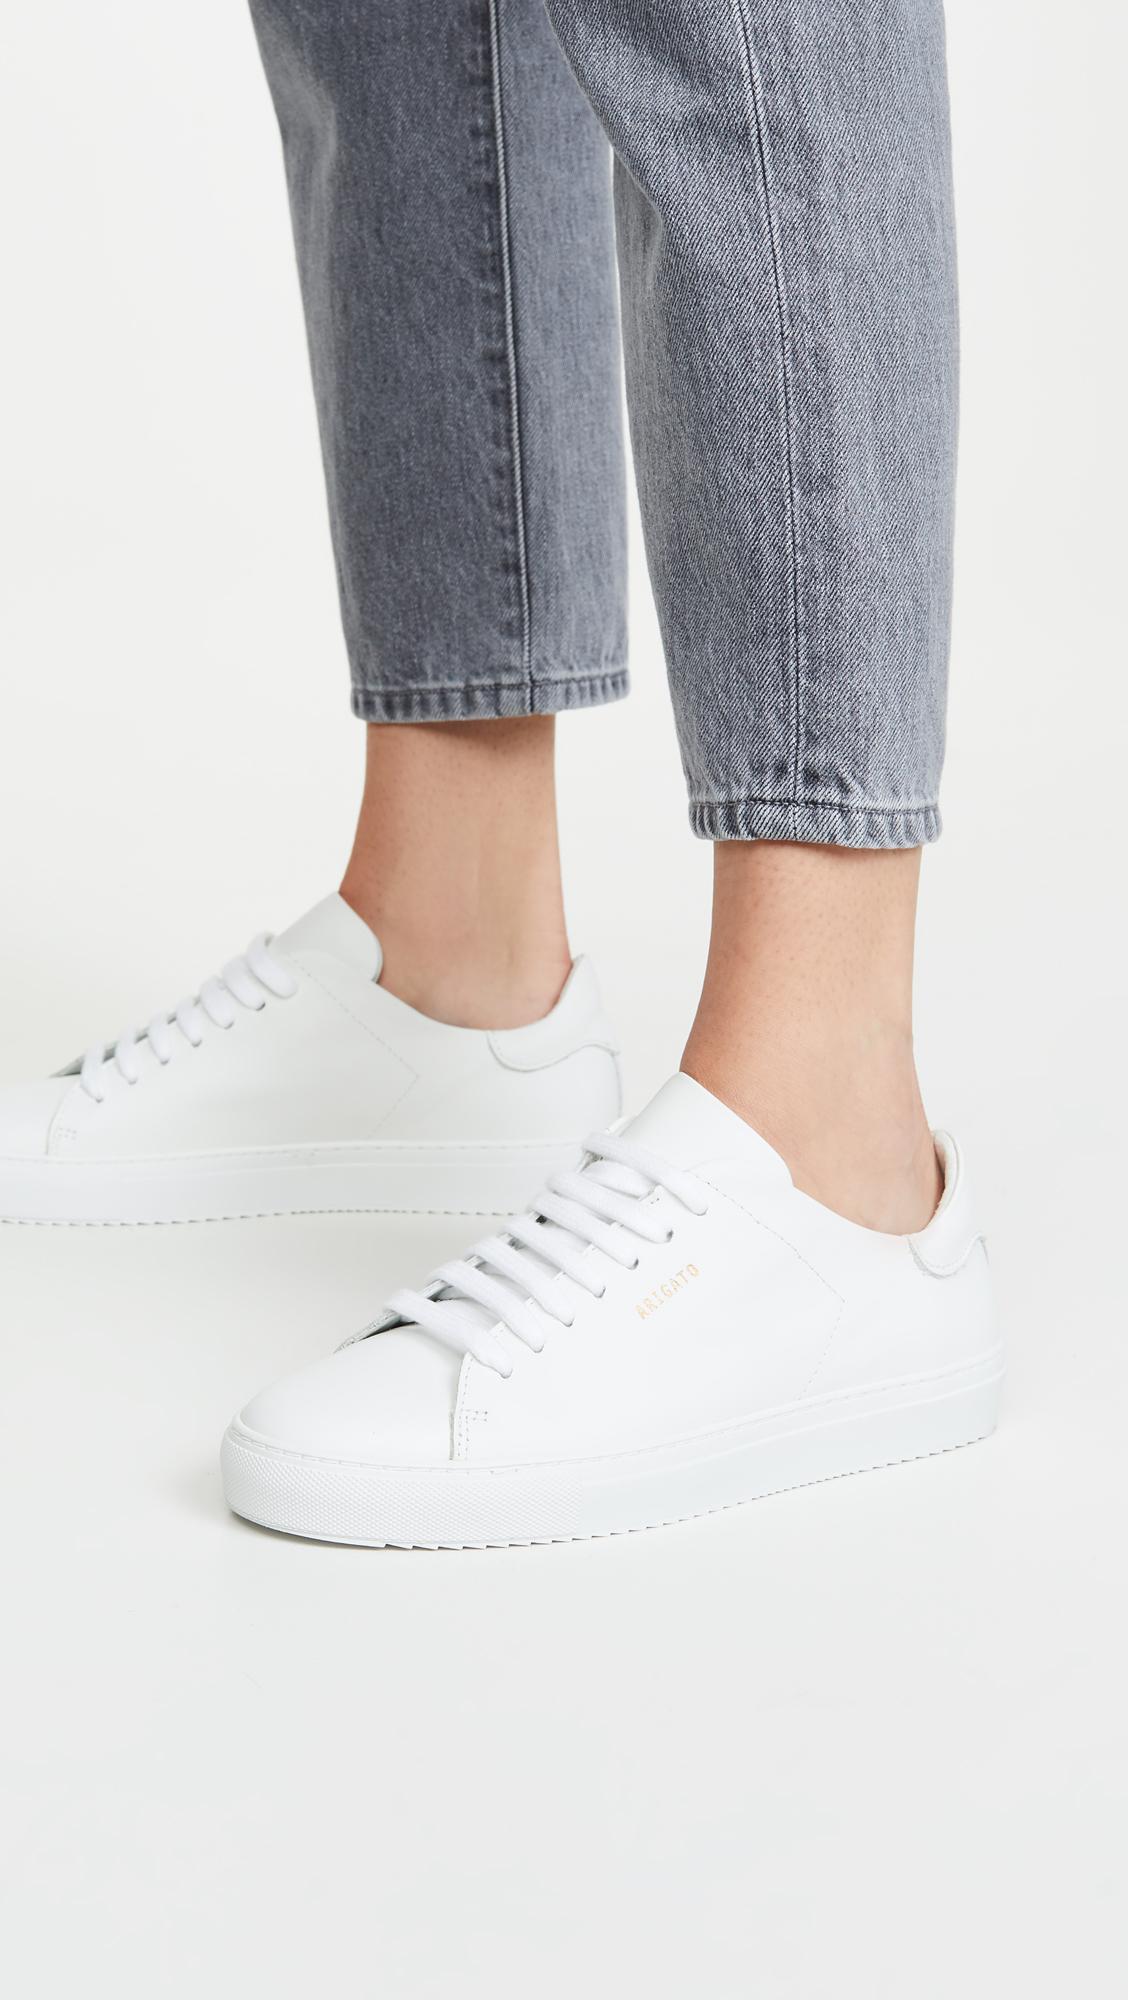 Axel Arigato Leather Clean 90 Sneakers in White - Lyst